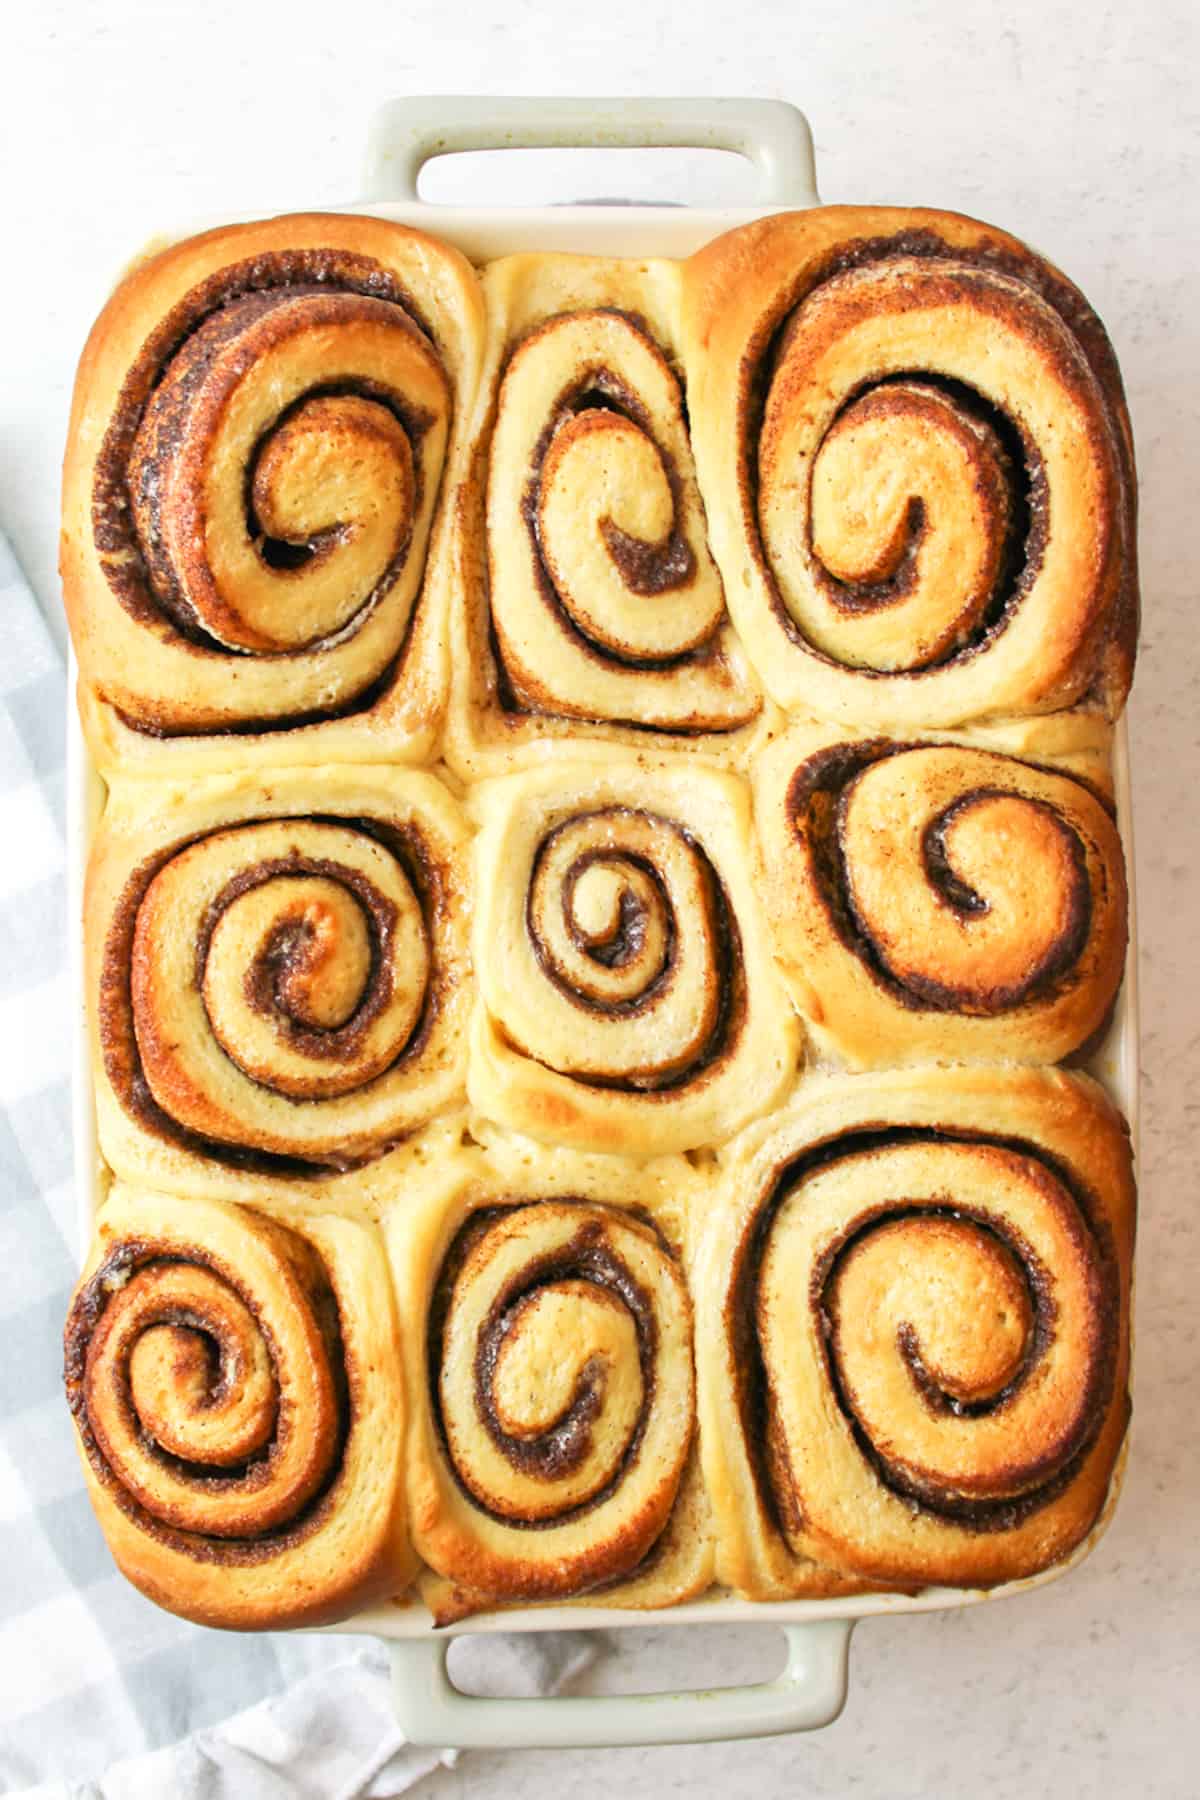 baked cinnamon rollls in a baking dish